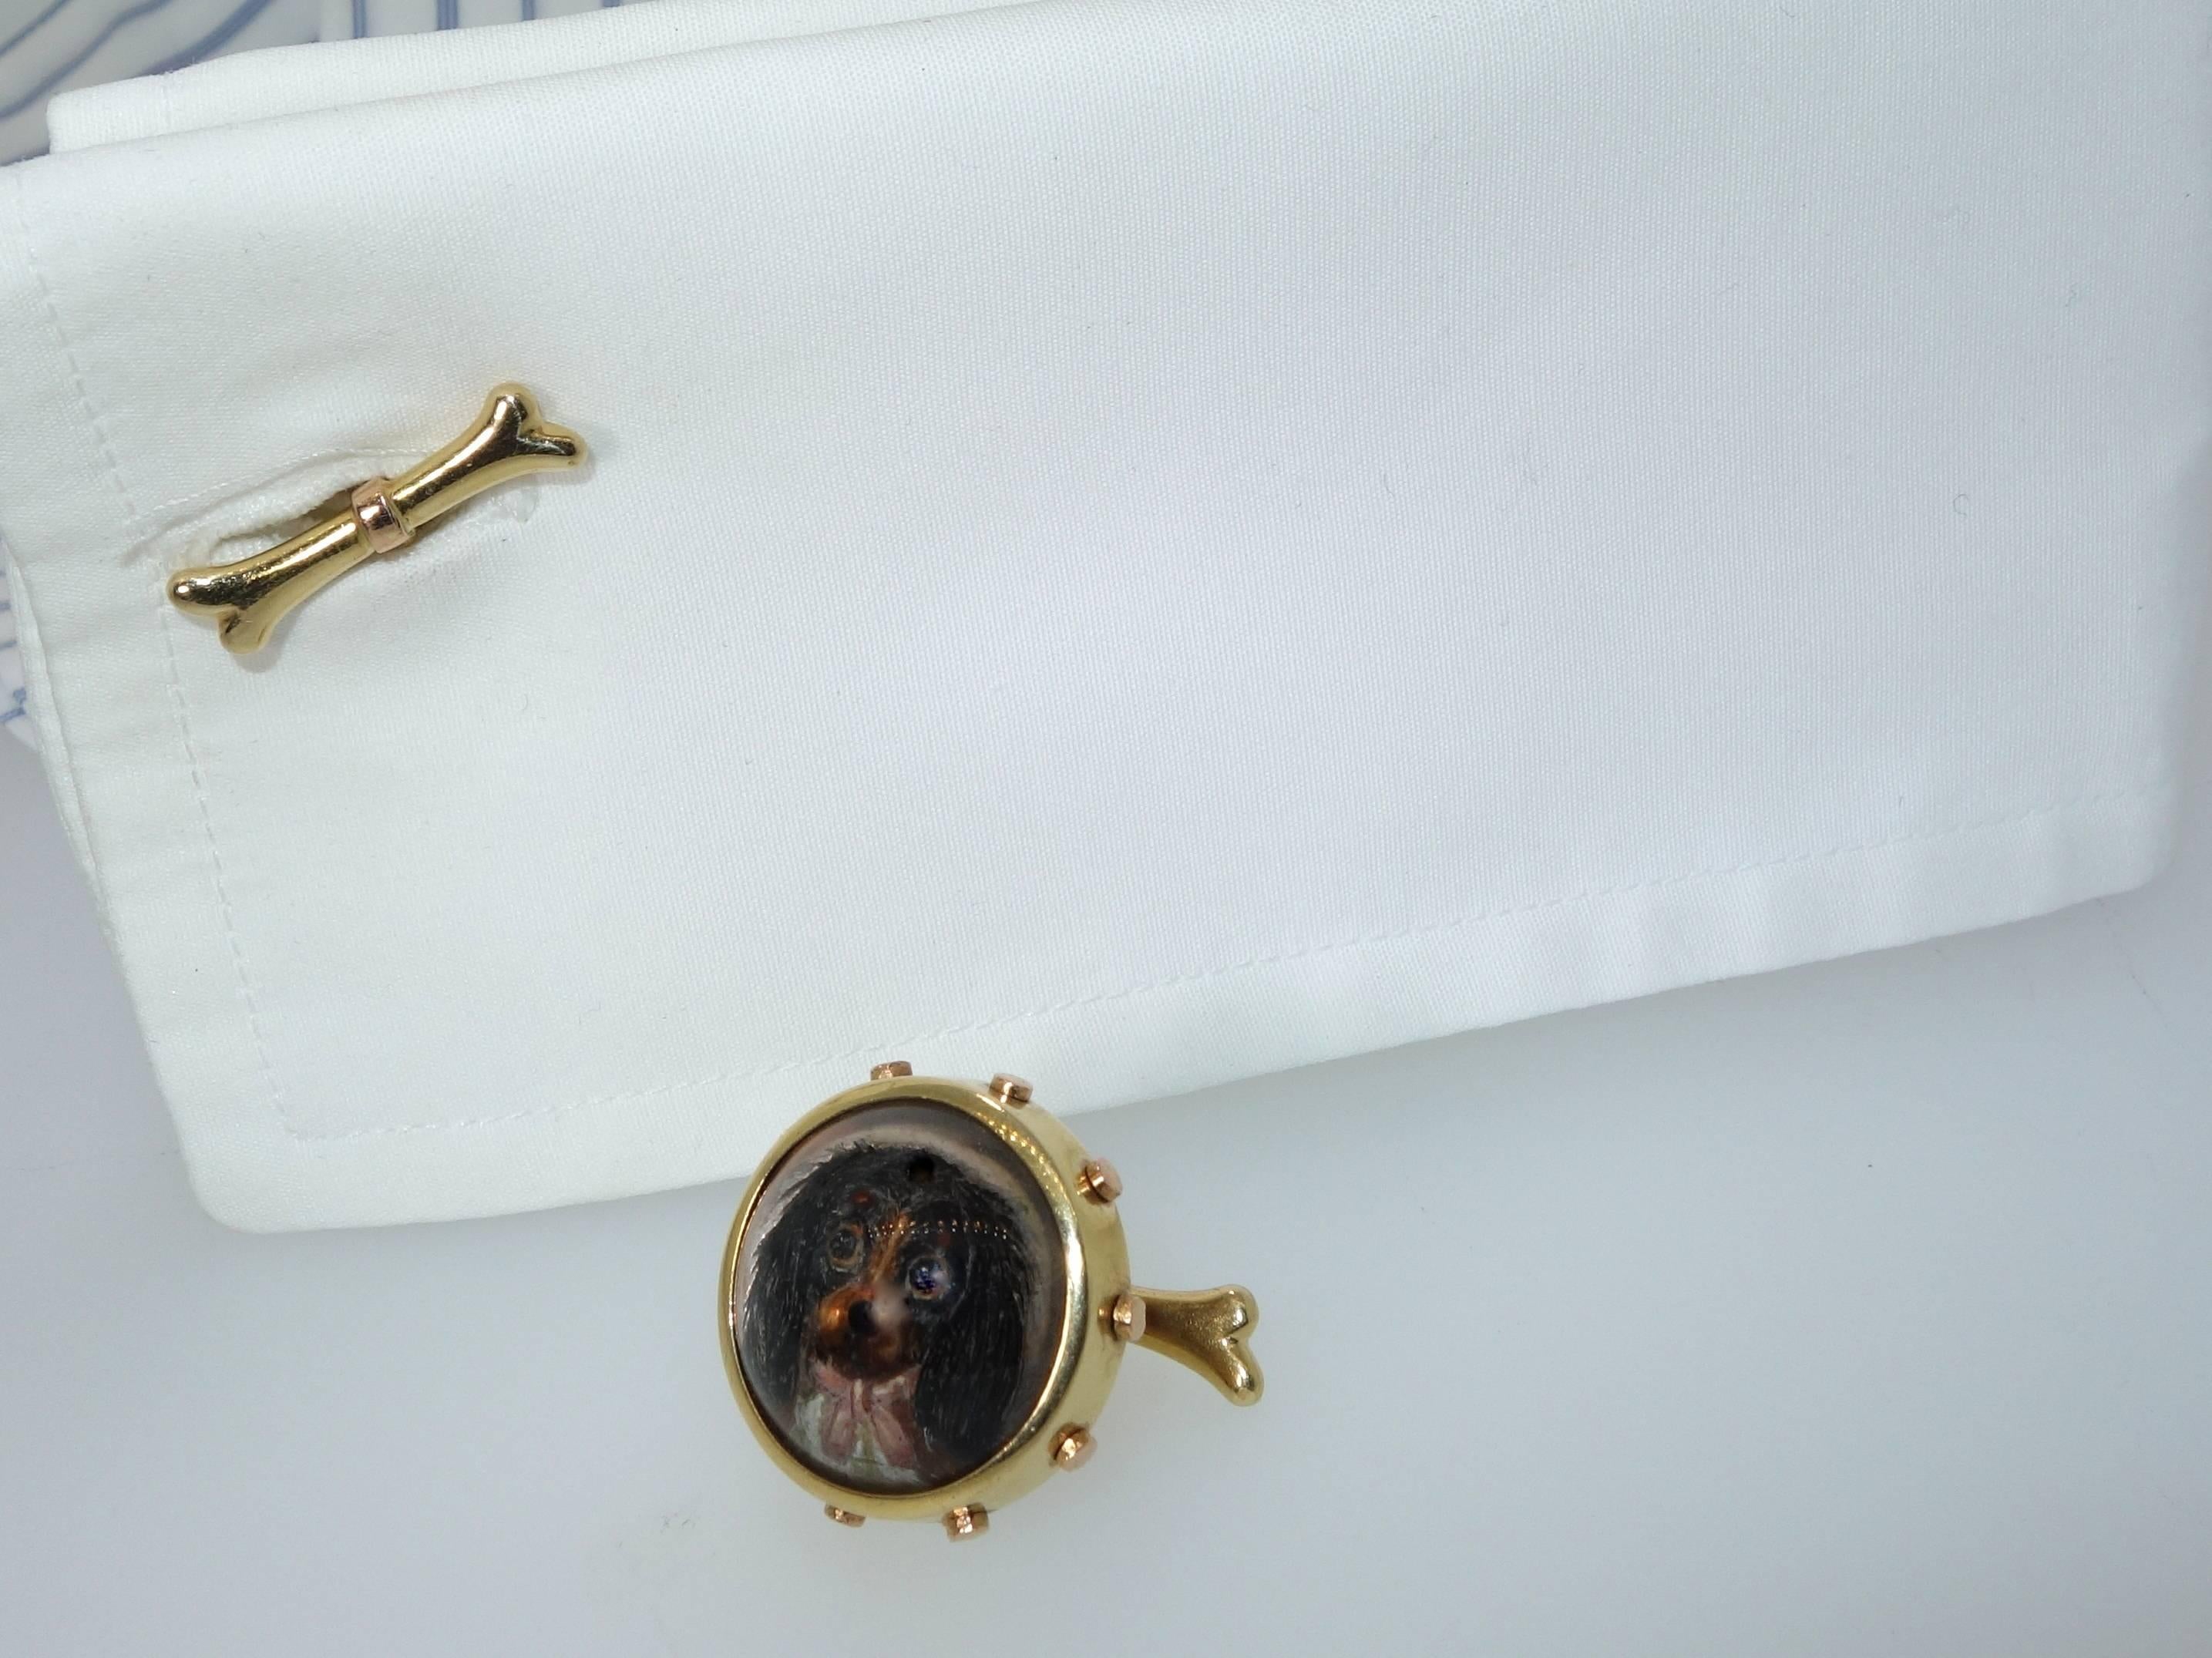 Charming doggy cuff-links made circa 1890, notice the pink bow around his neck!
